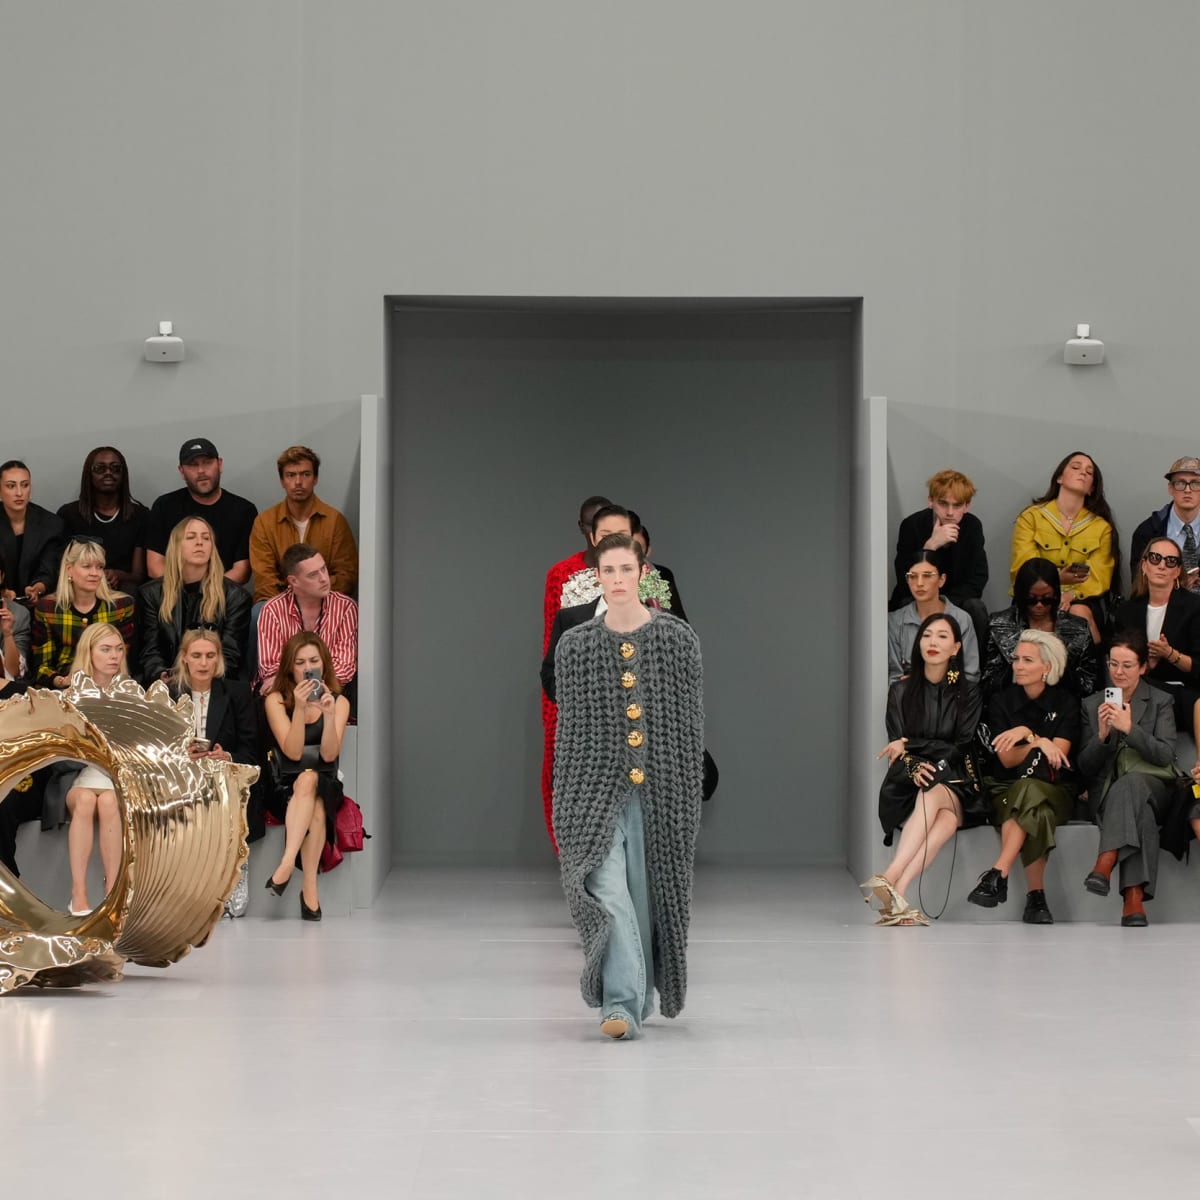 Jonathan Anderson on his AW20 Loewe collection at Paris Fashion Week